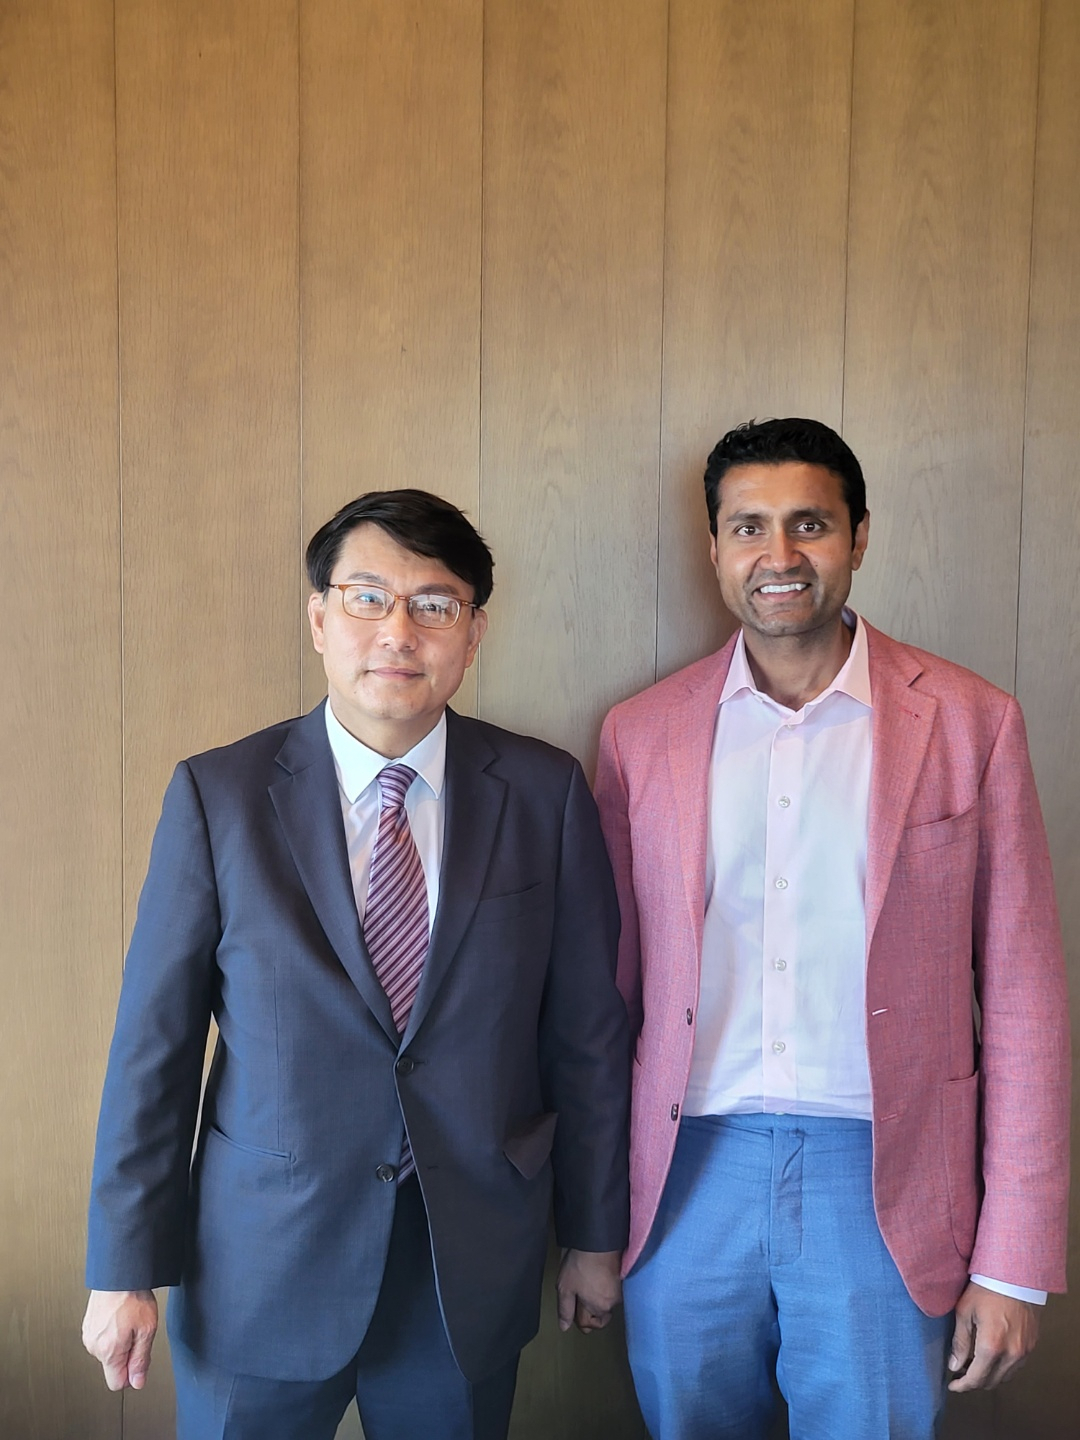 Rep. Yoon Sang-hyun (left) poses for a photo with Shyam Sankar, chief operating officer at Palantir Technologies, on Wednesday. (Office of Rep. Yoon Sang-hyun)